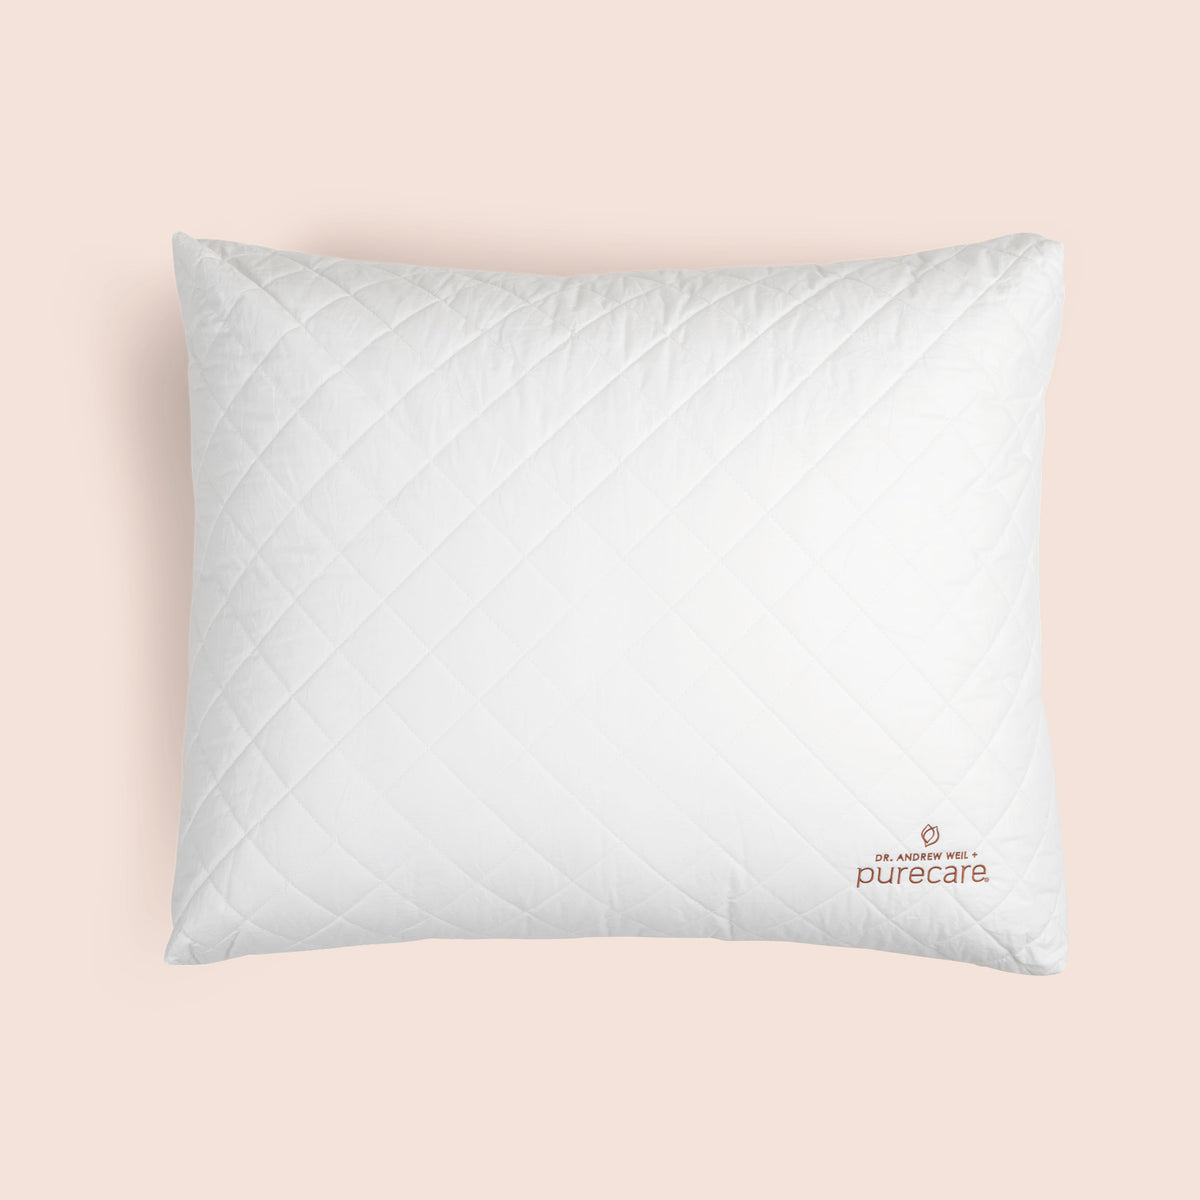 Image of a white, square Meditation Cushion shown from a top view on a light pink background with the Dr. Andrew Weil + Purecare logo sewn on in the bottom right corner